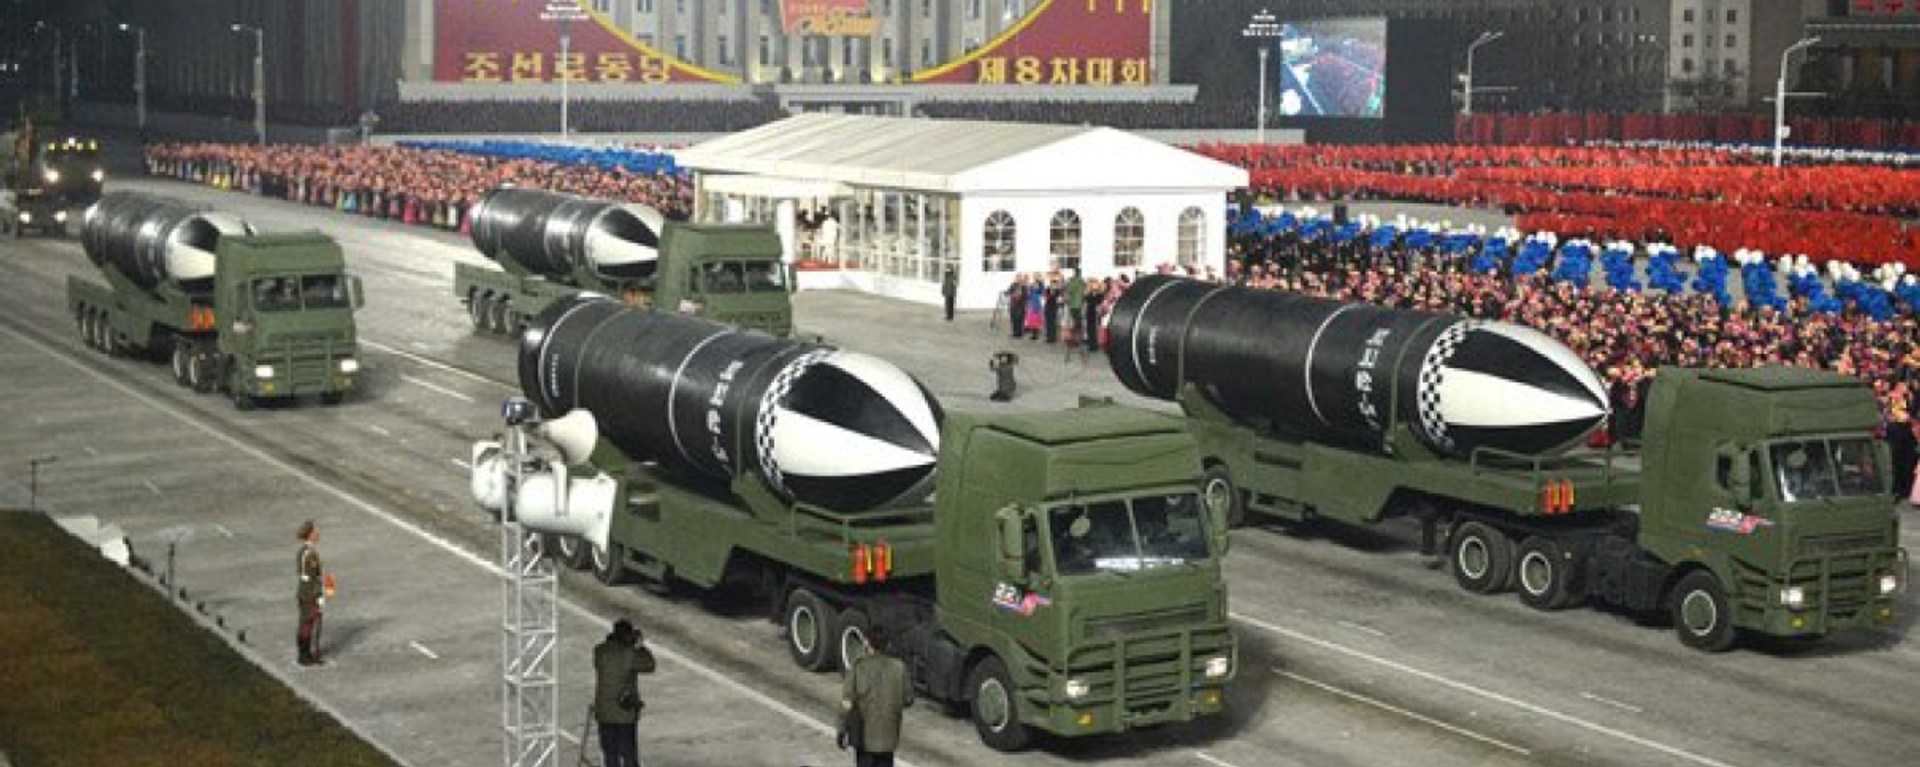 A new submarine-launched ballistic missile, provisionally designated the Pukguksong-5, is unveiled in a military parade in Pyongyang, DPRK, on January 14, 2021 - Sputnik International, 1920, 20.01.2022